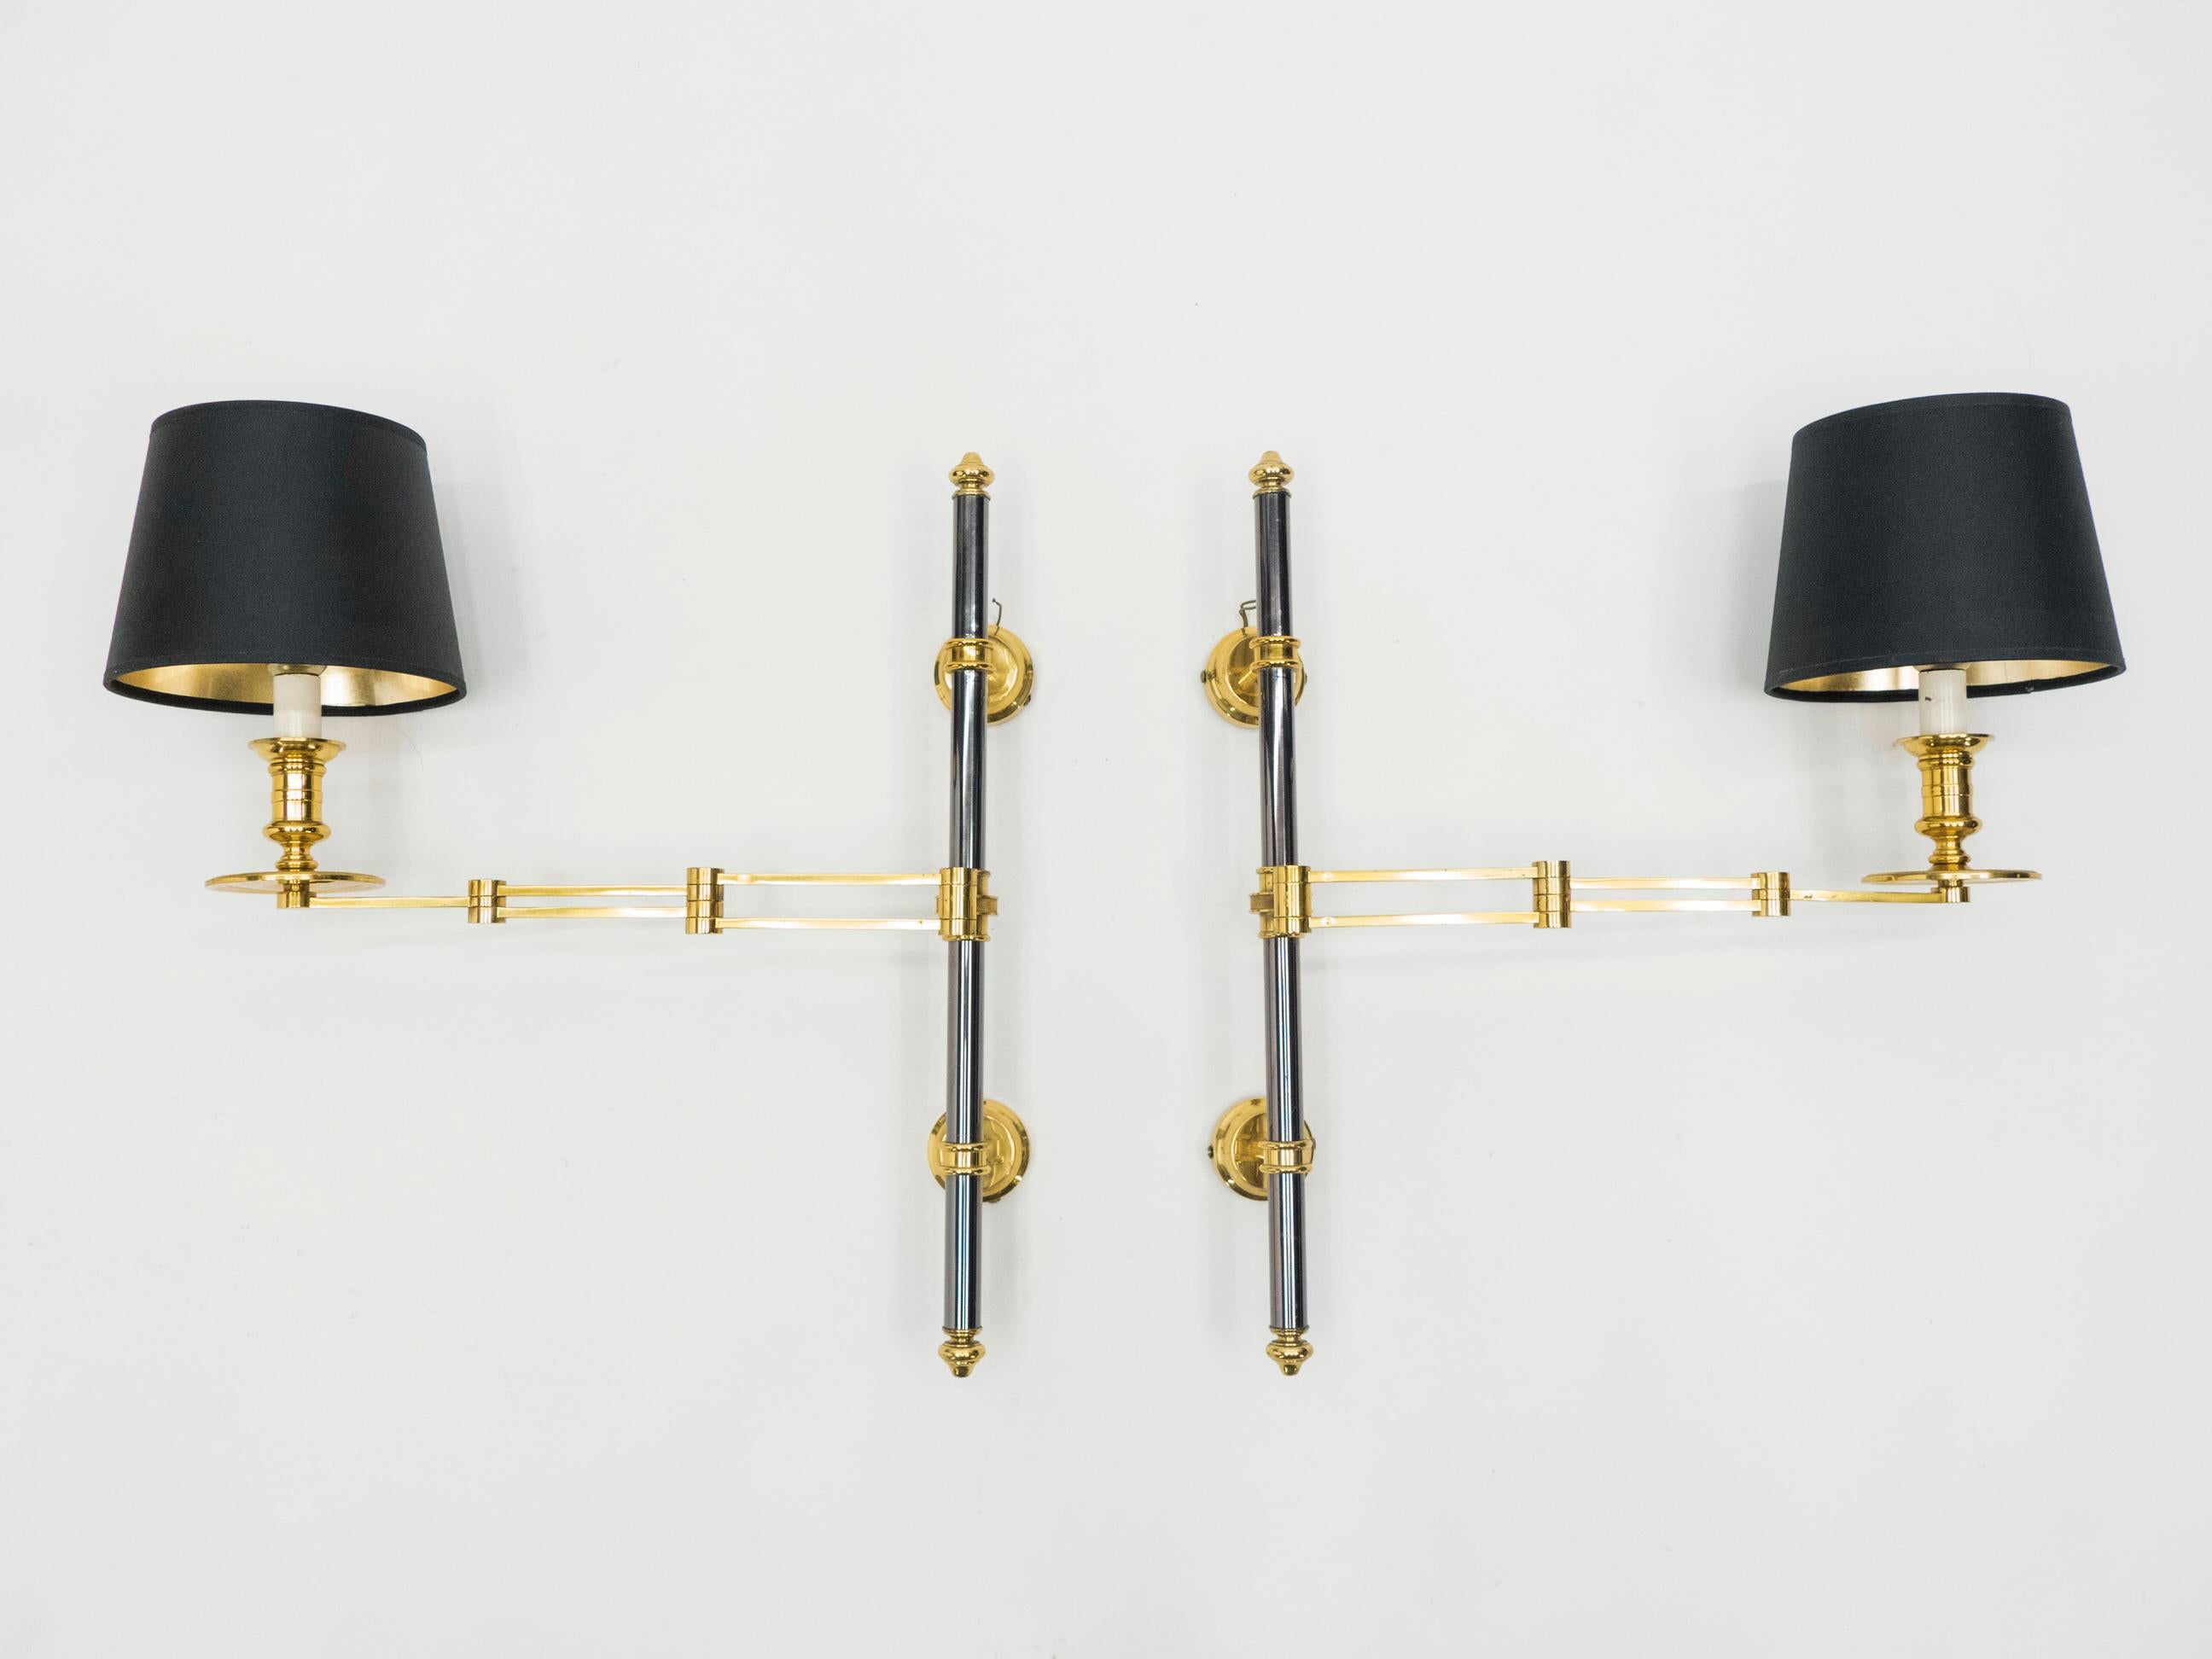 This pair of 1960s sconces is made from Industrial-feeling gunmetal steel and shining brass. The sconces were designed by Maison Jansen, the infamous French furniture design house and they display the typical Maison Jansen neoclassical look, with